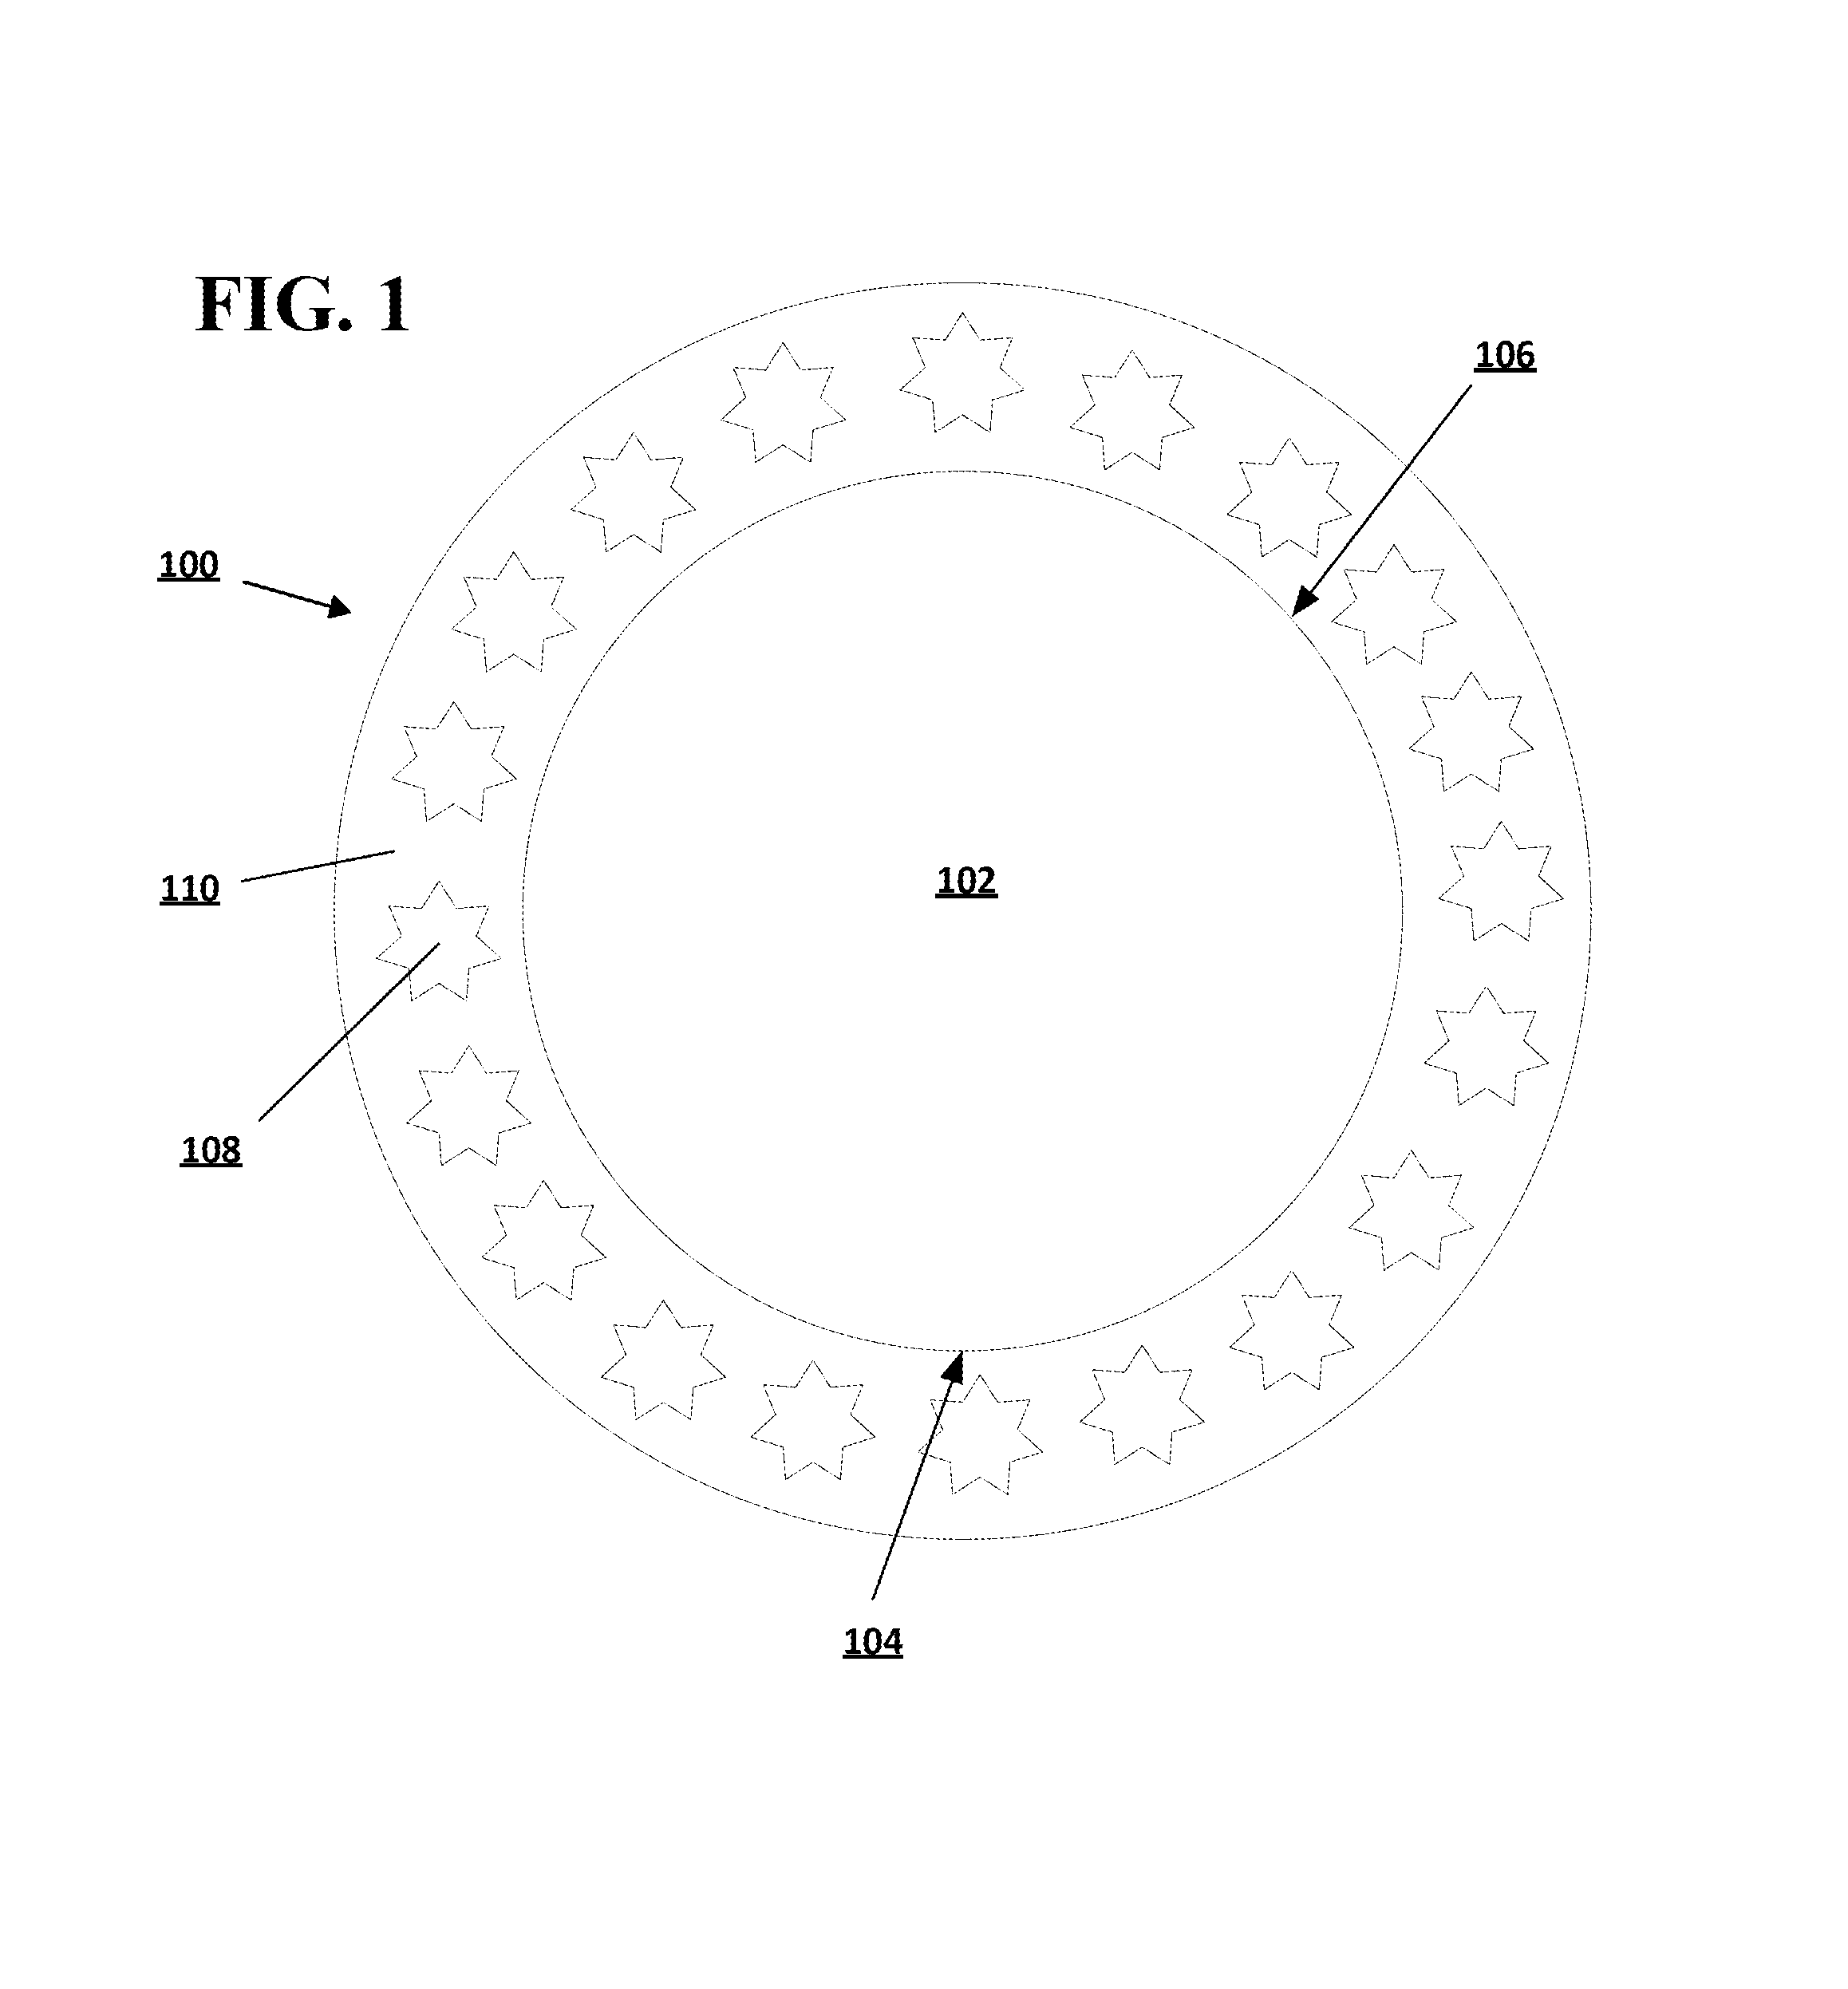 Method for controlling volume using a rotating knob interface